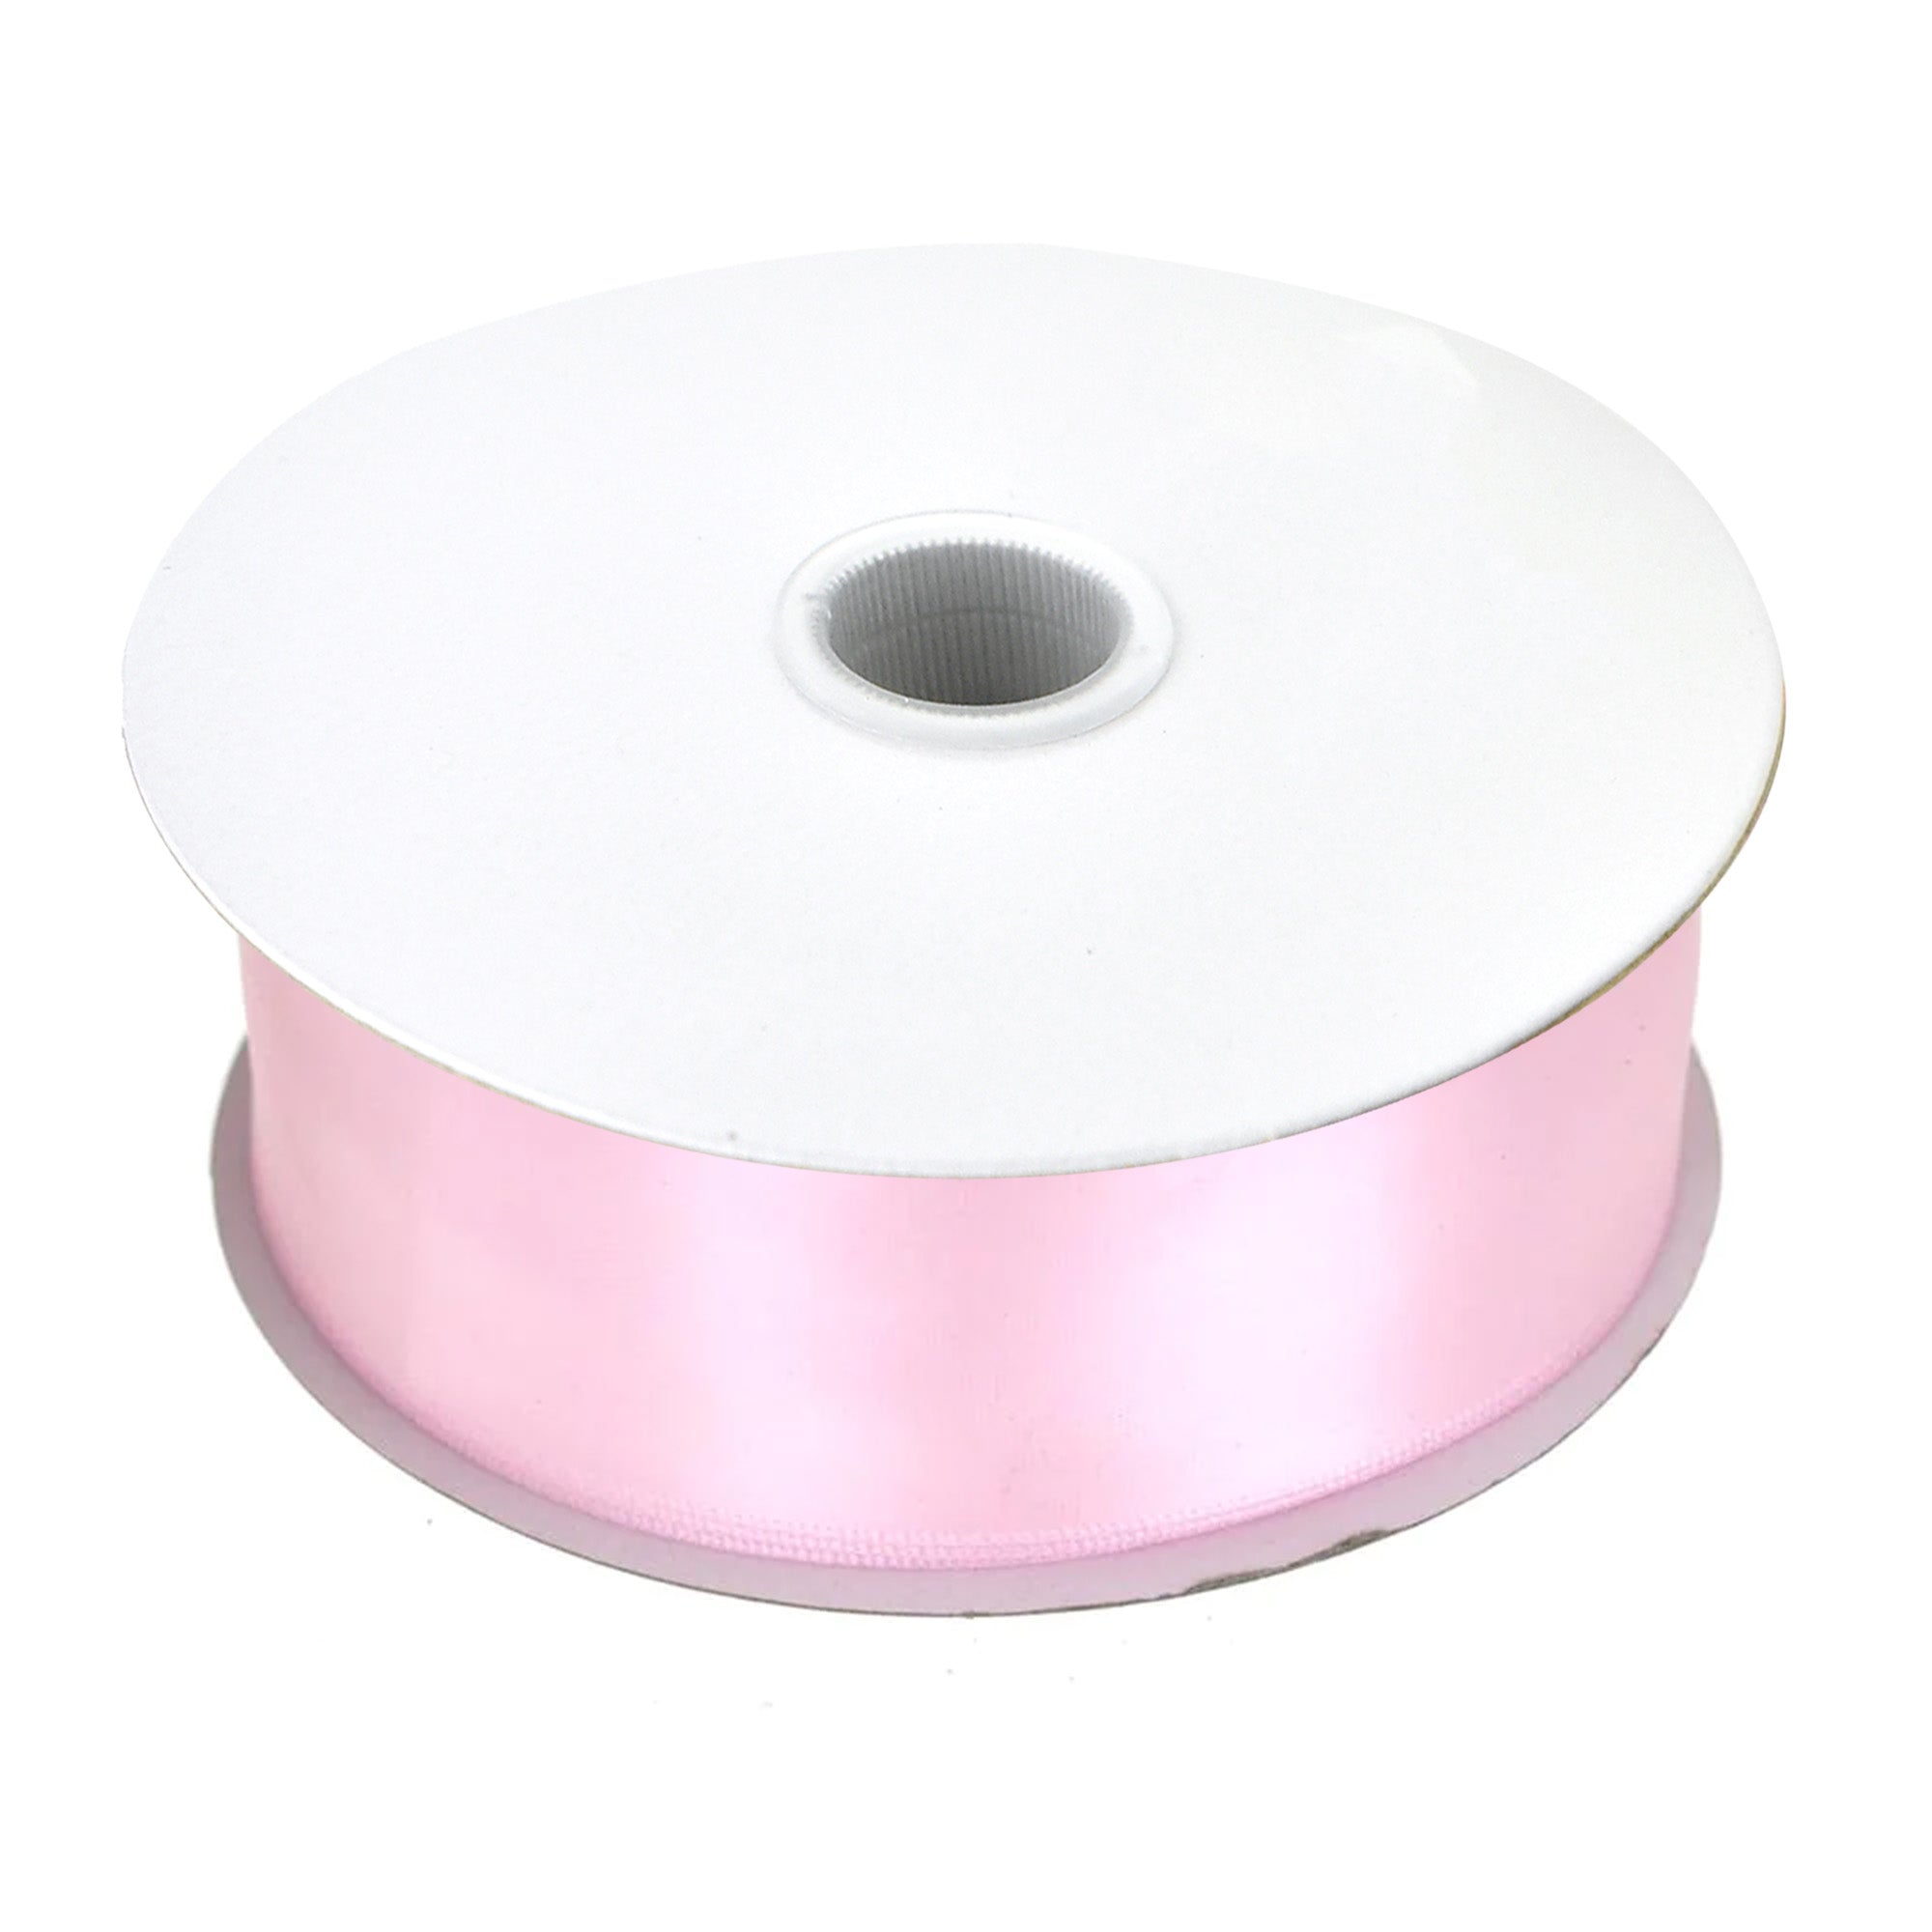 3 Double Faced Satin Ribbon 117 Light Pink 100yd